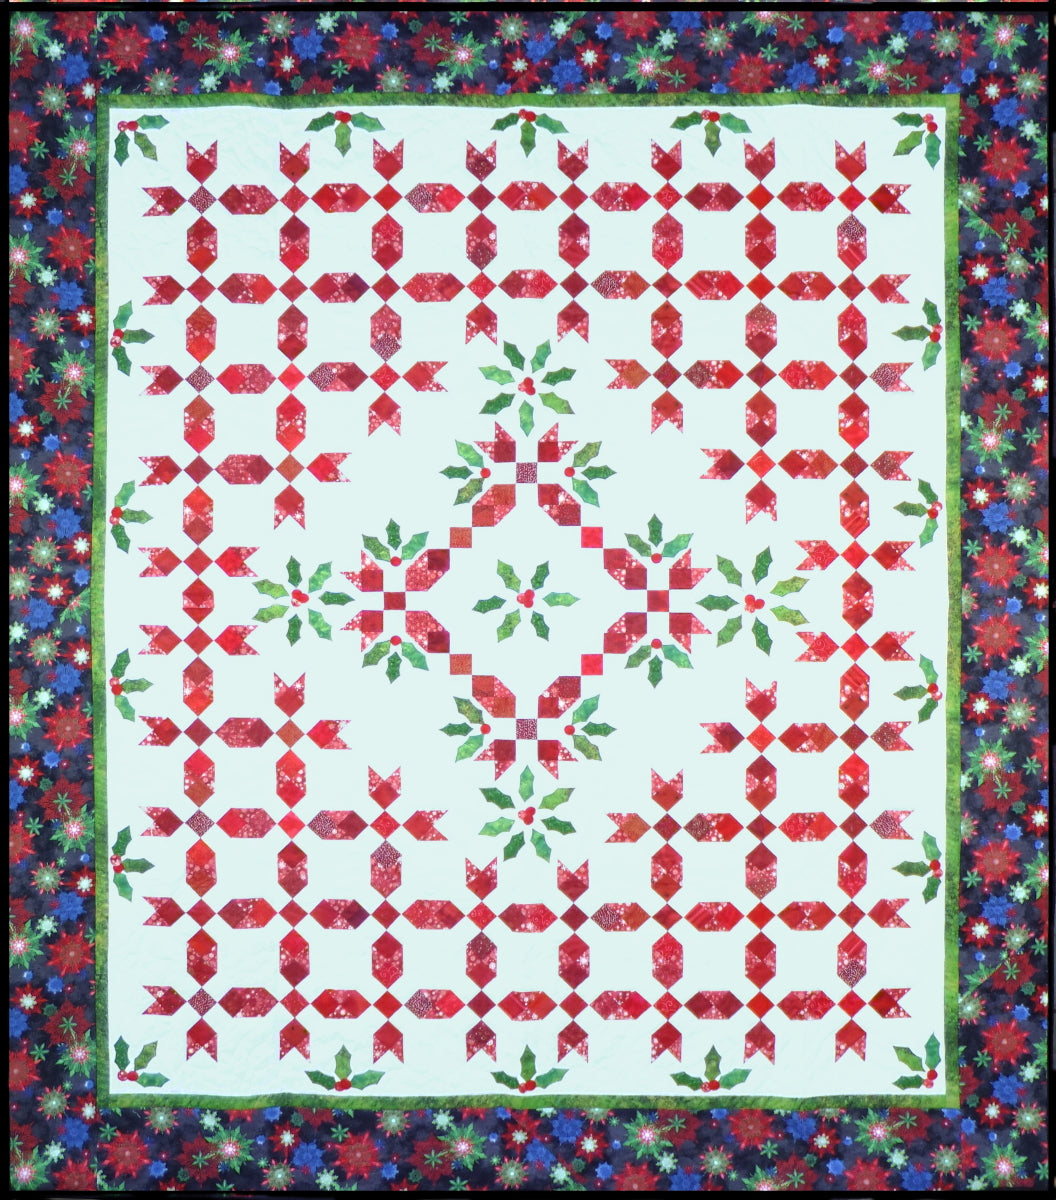 Patchwork and applique Christmas quilt pattern